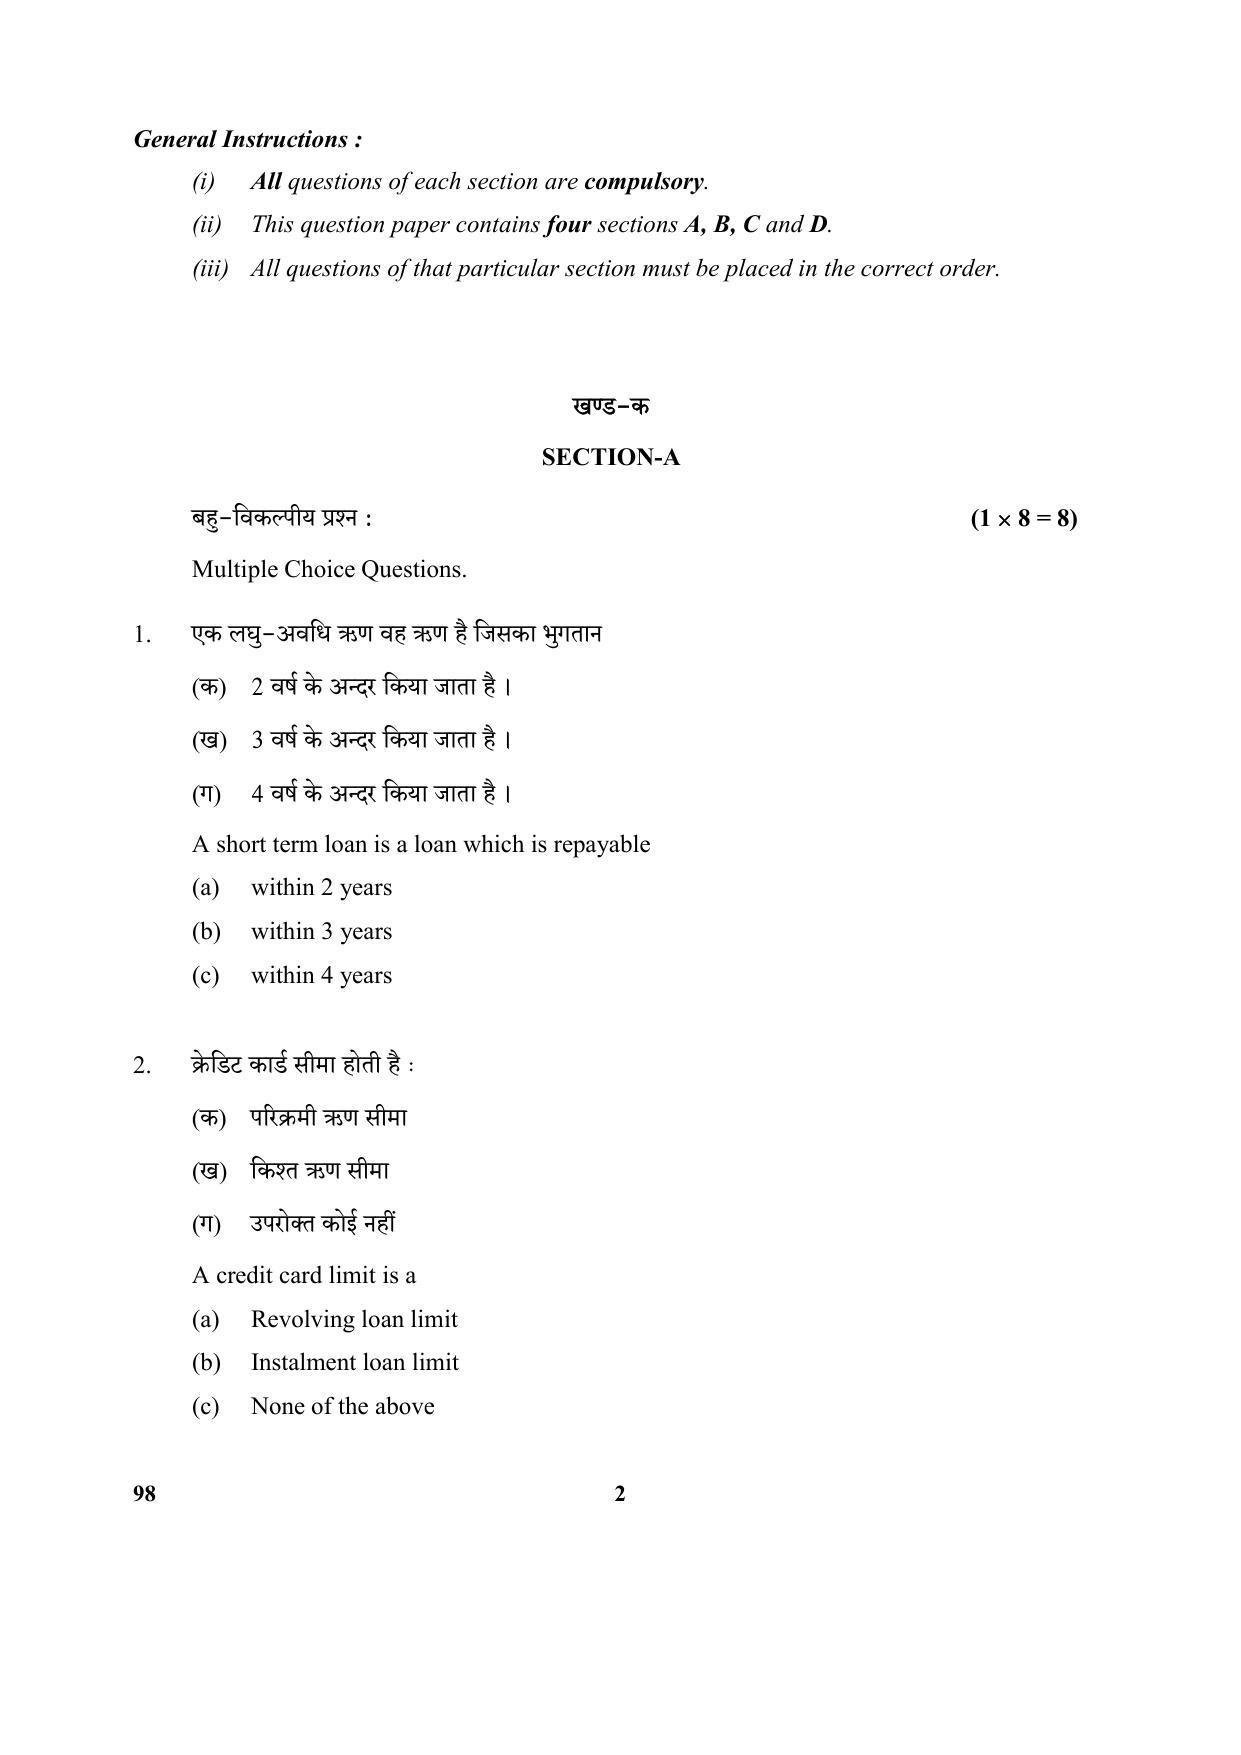 CBSE Class 10 98 (Banking & Insurance) 2018 Question Paper - Page 2